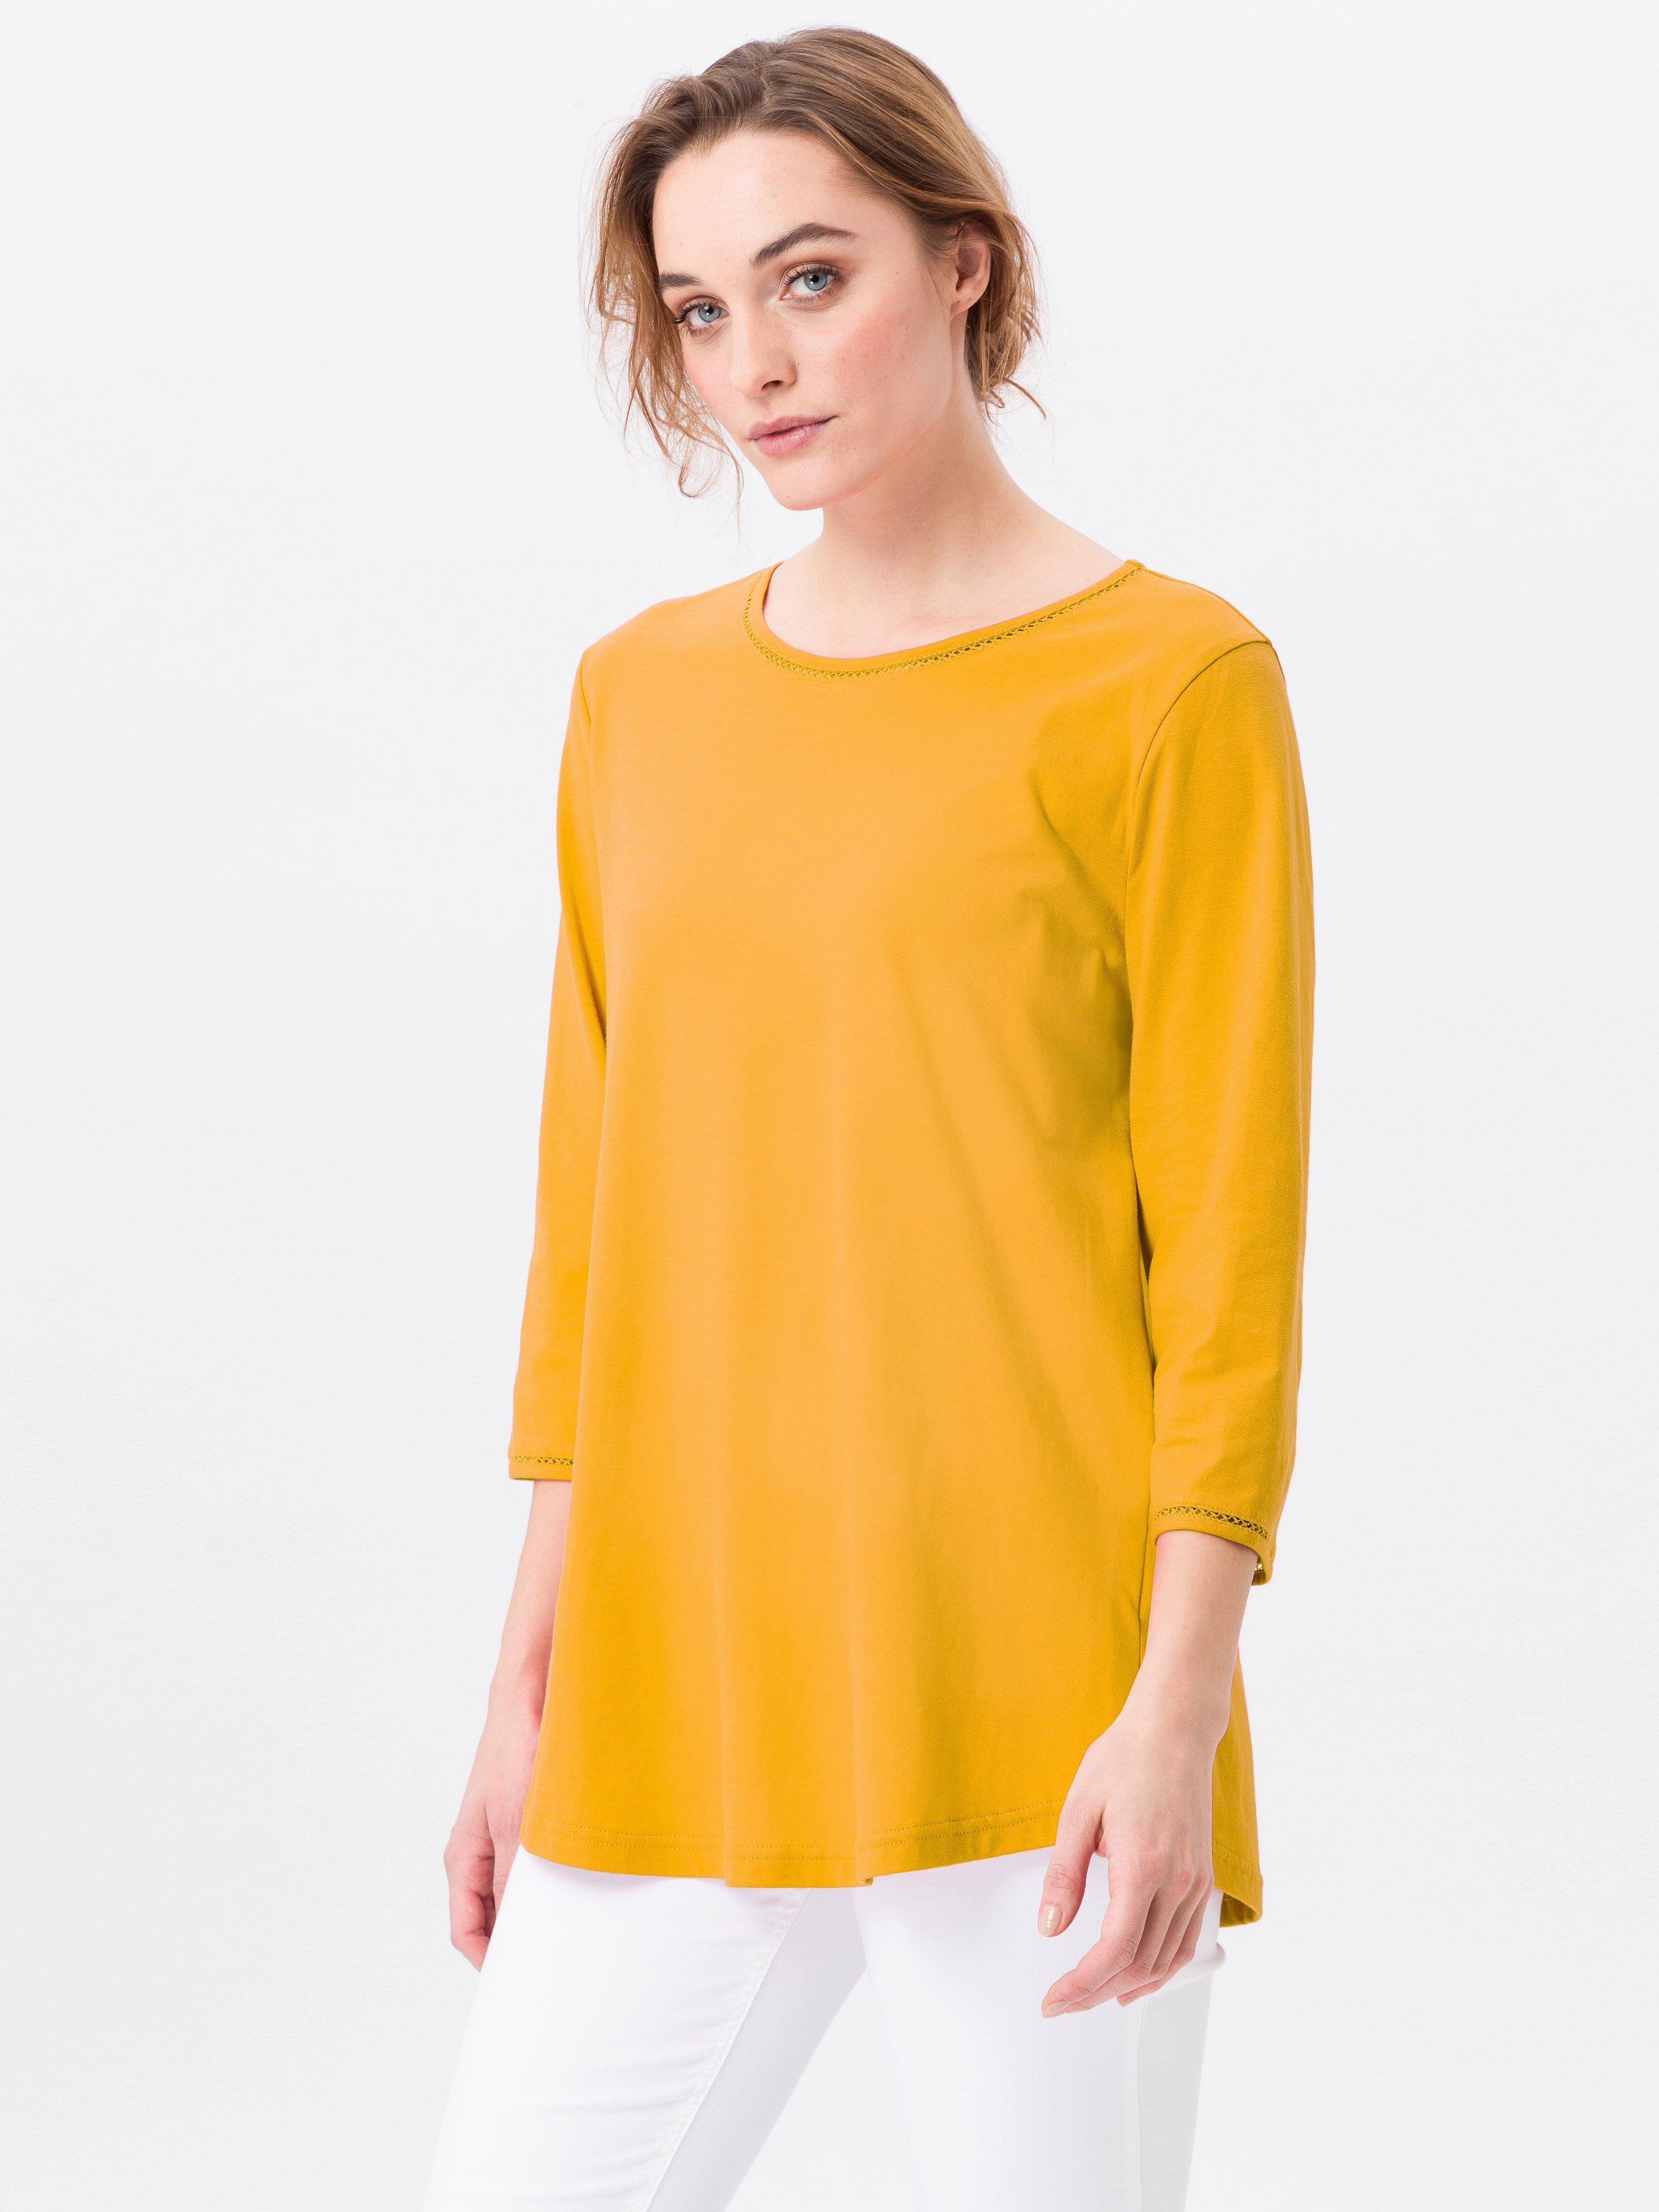 Green Cotton - Round-neck top in 100% cotton - maize yellow